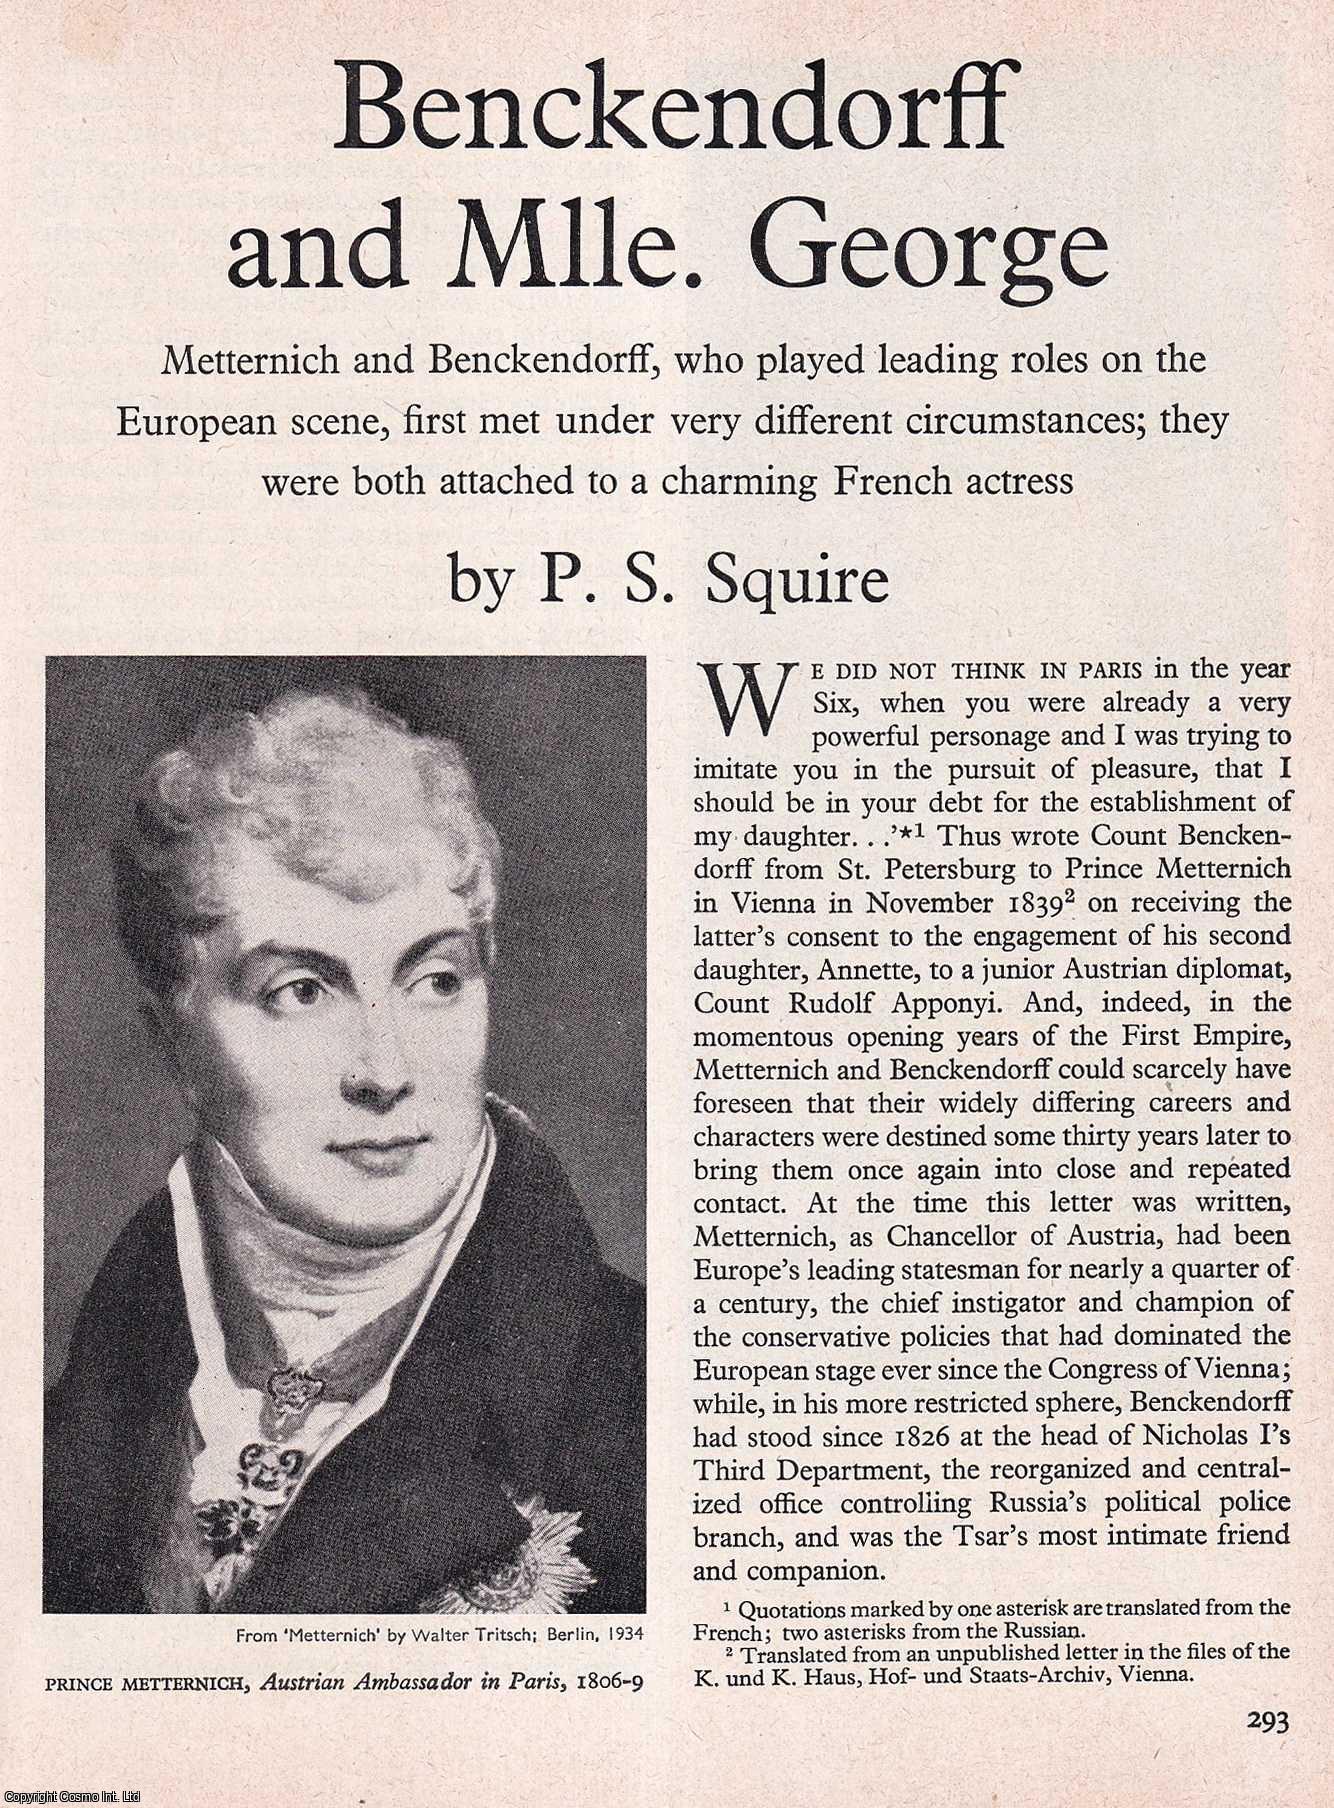 P.S. Squire - Benckendorff and Mlle. George. An original article from History Today magazine, 1967.